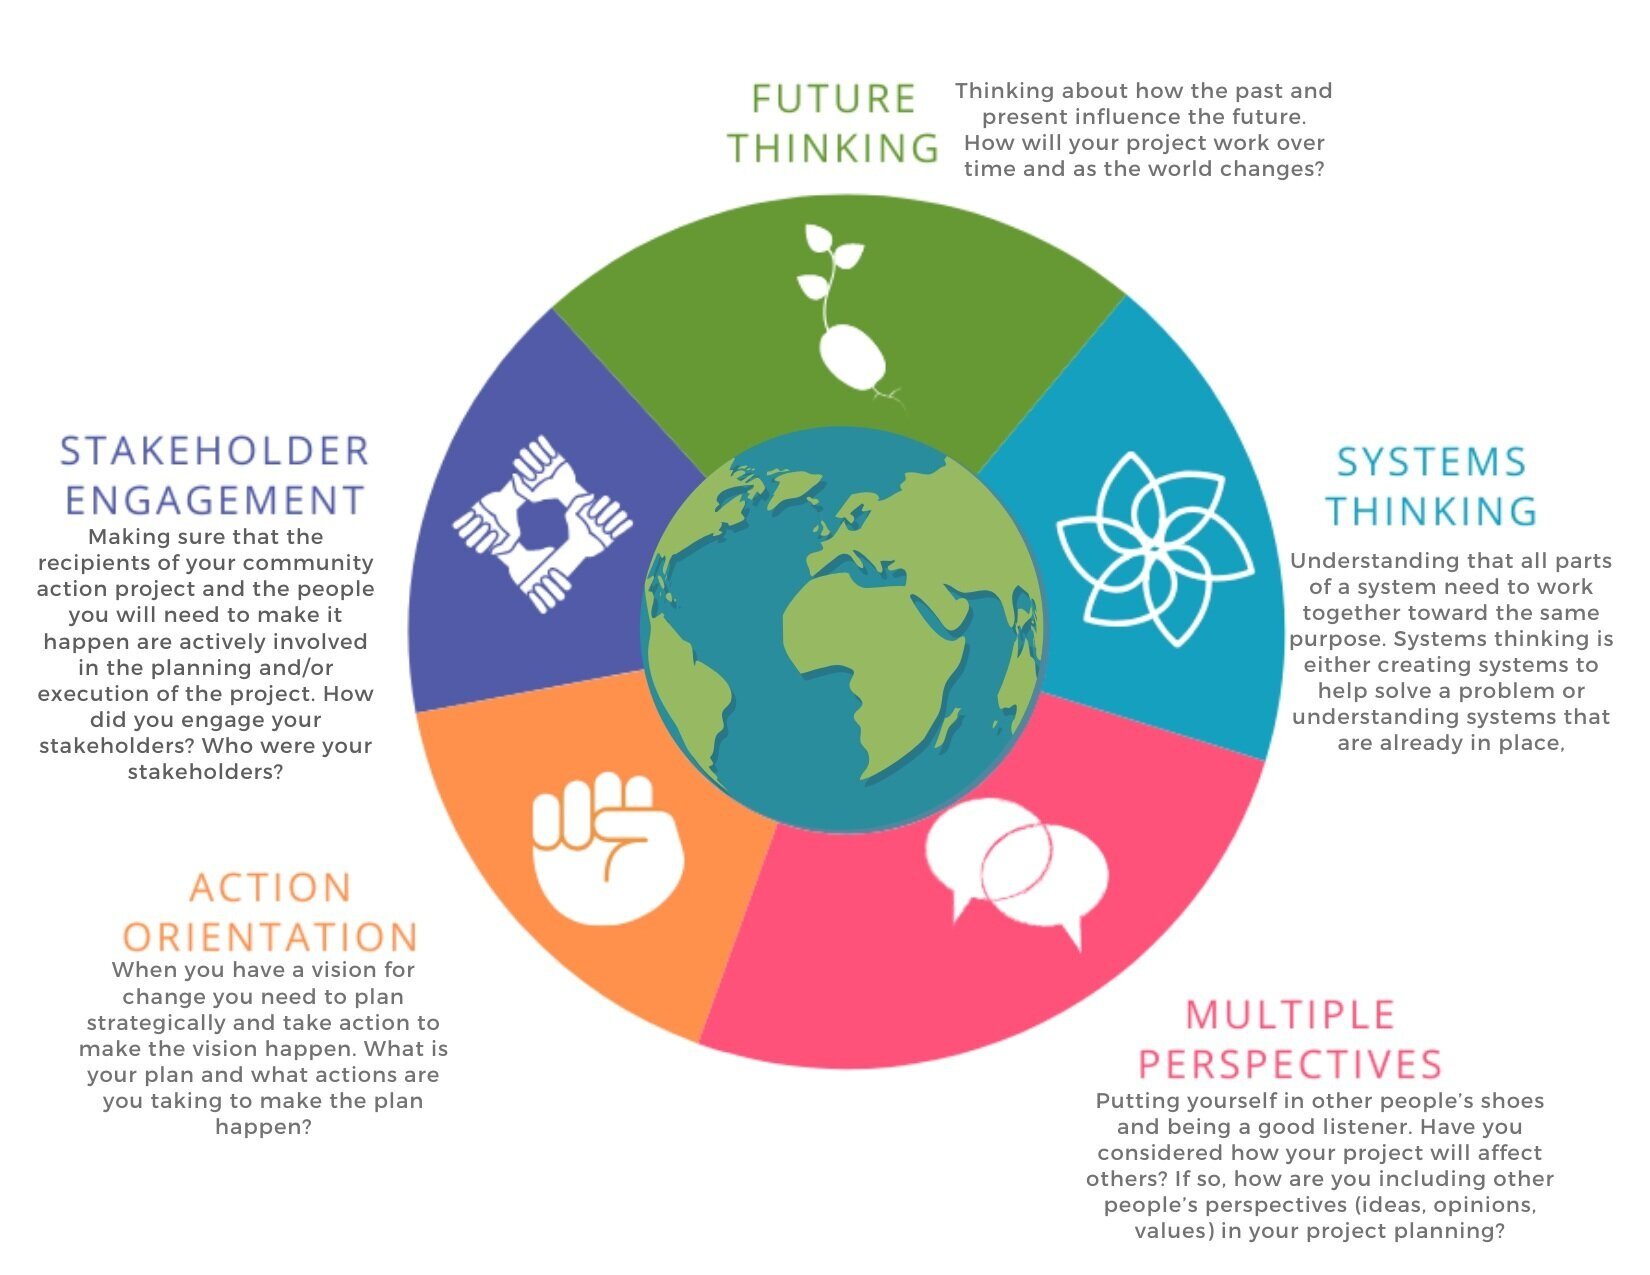 Systems Change for a Sustainable World: Becoming a Change Maker in Your  Community (Online Course) – Compass Education